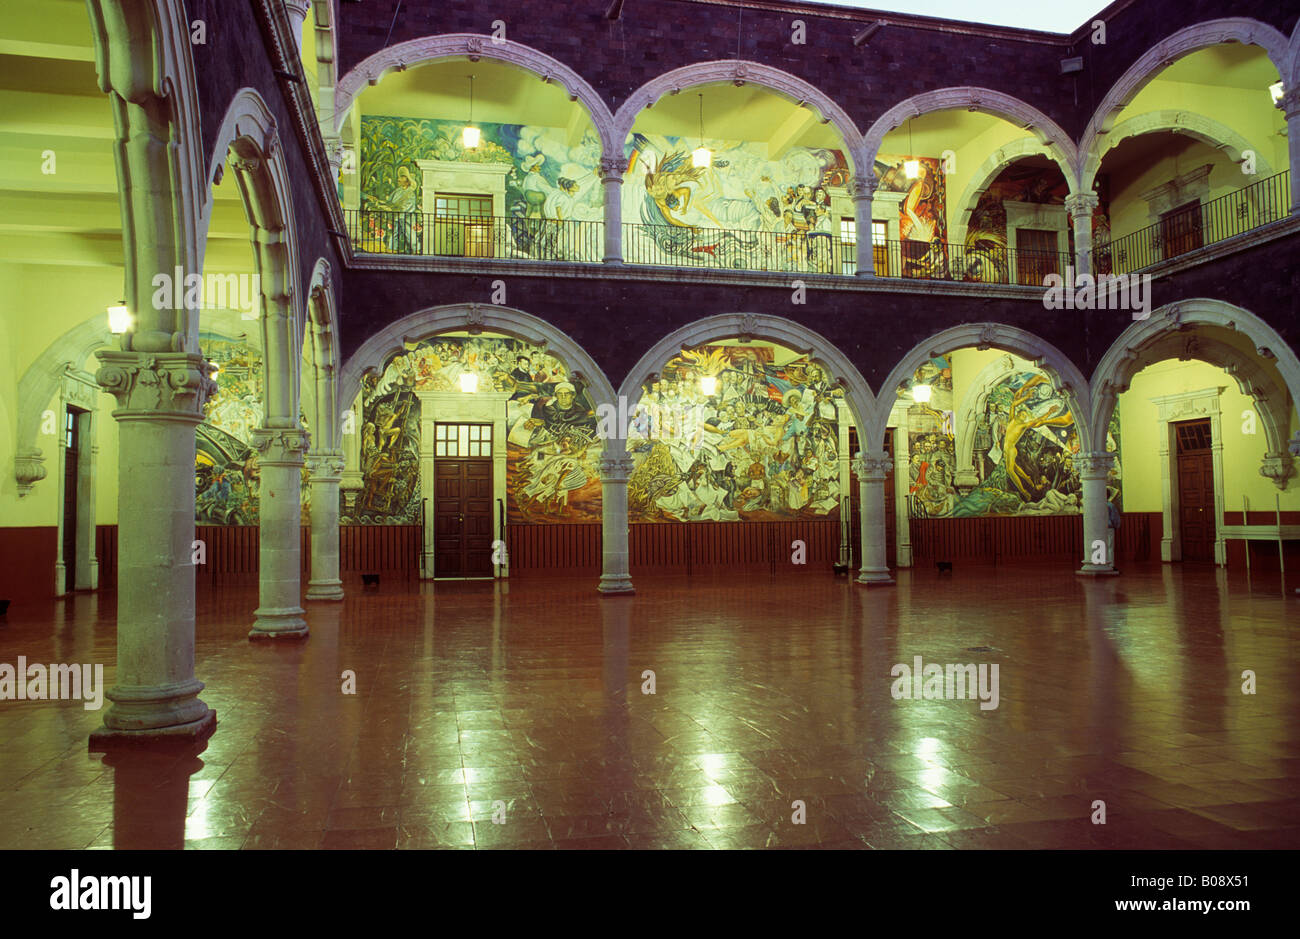 Mural paintings behind the arches of an atrium in the Palacio de Gobierno municipal government palace, Aguascalientes, Mexico Stock Photo